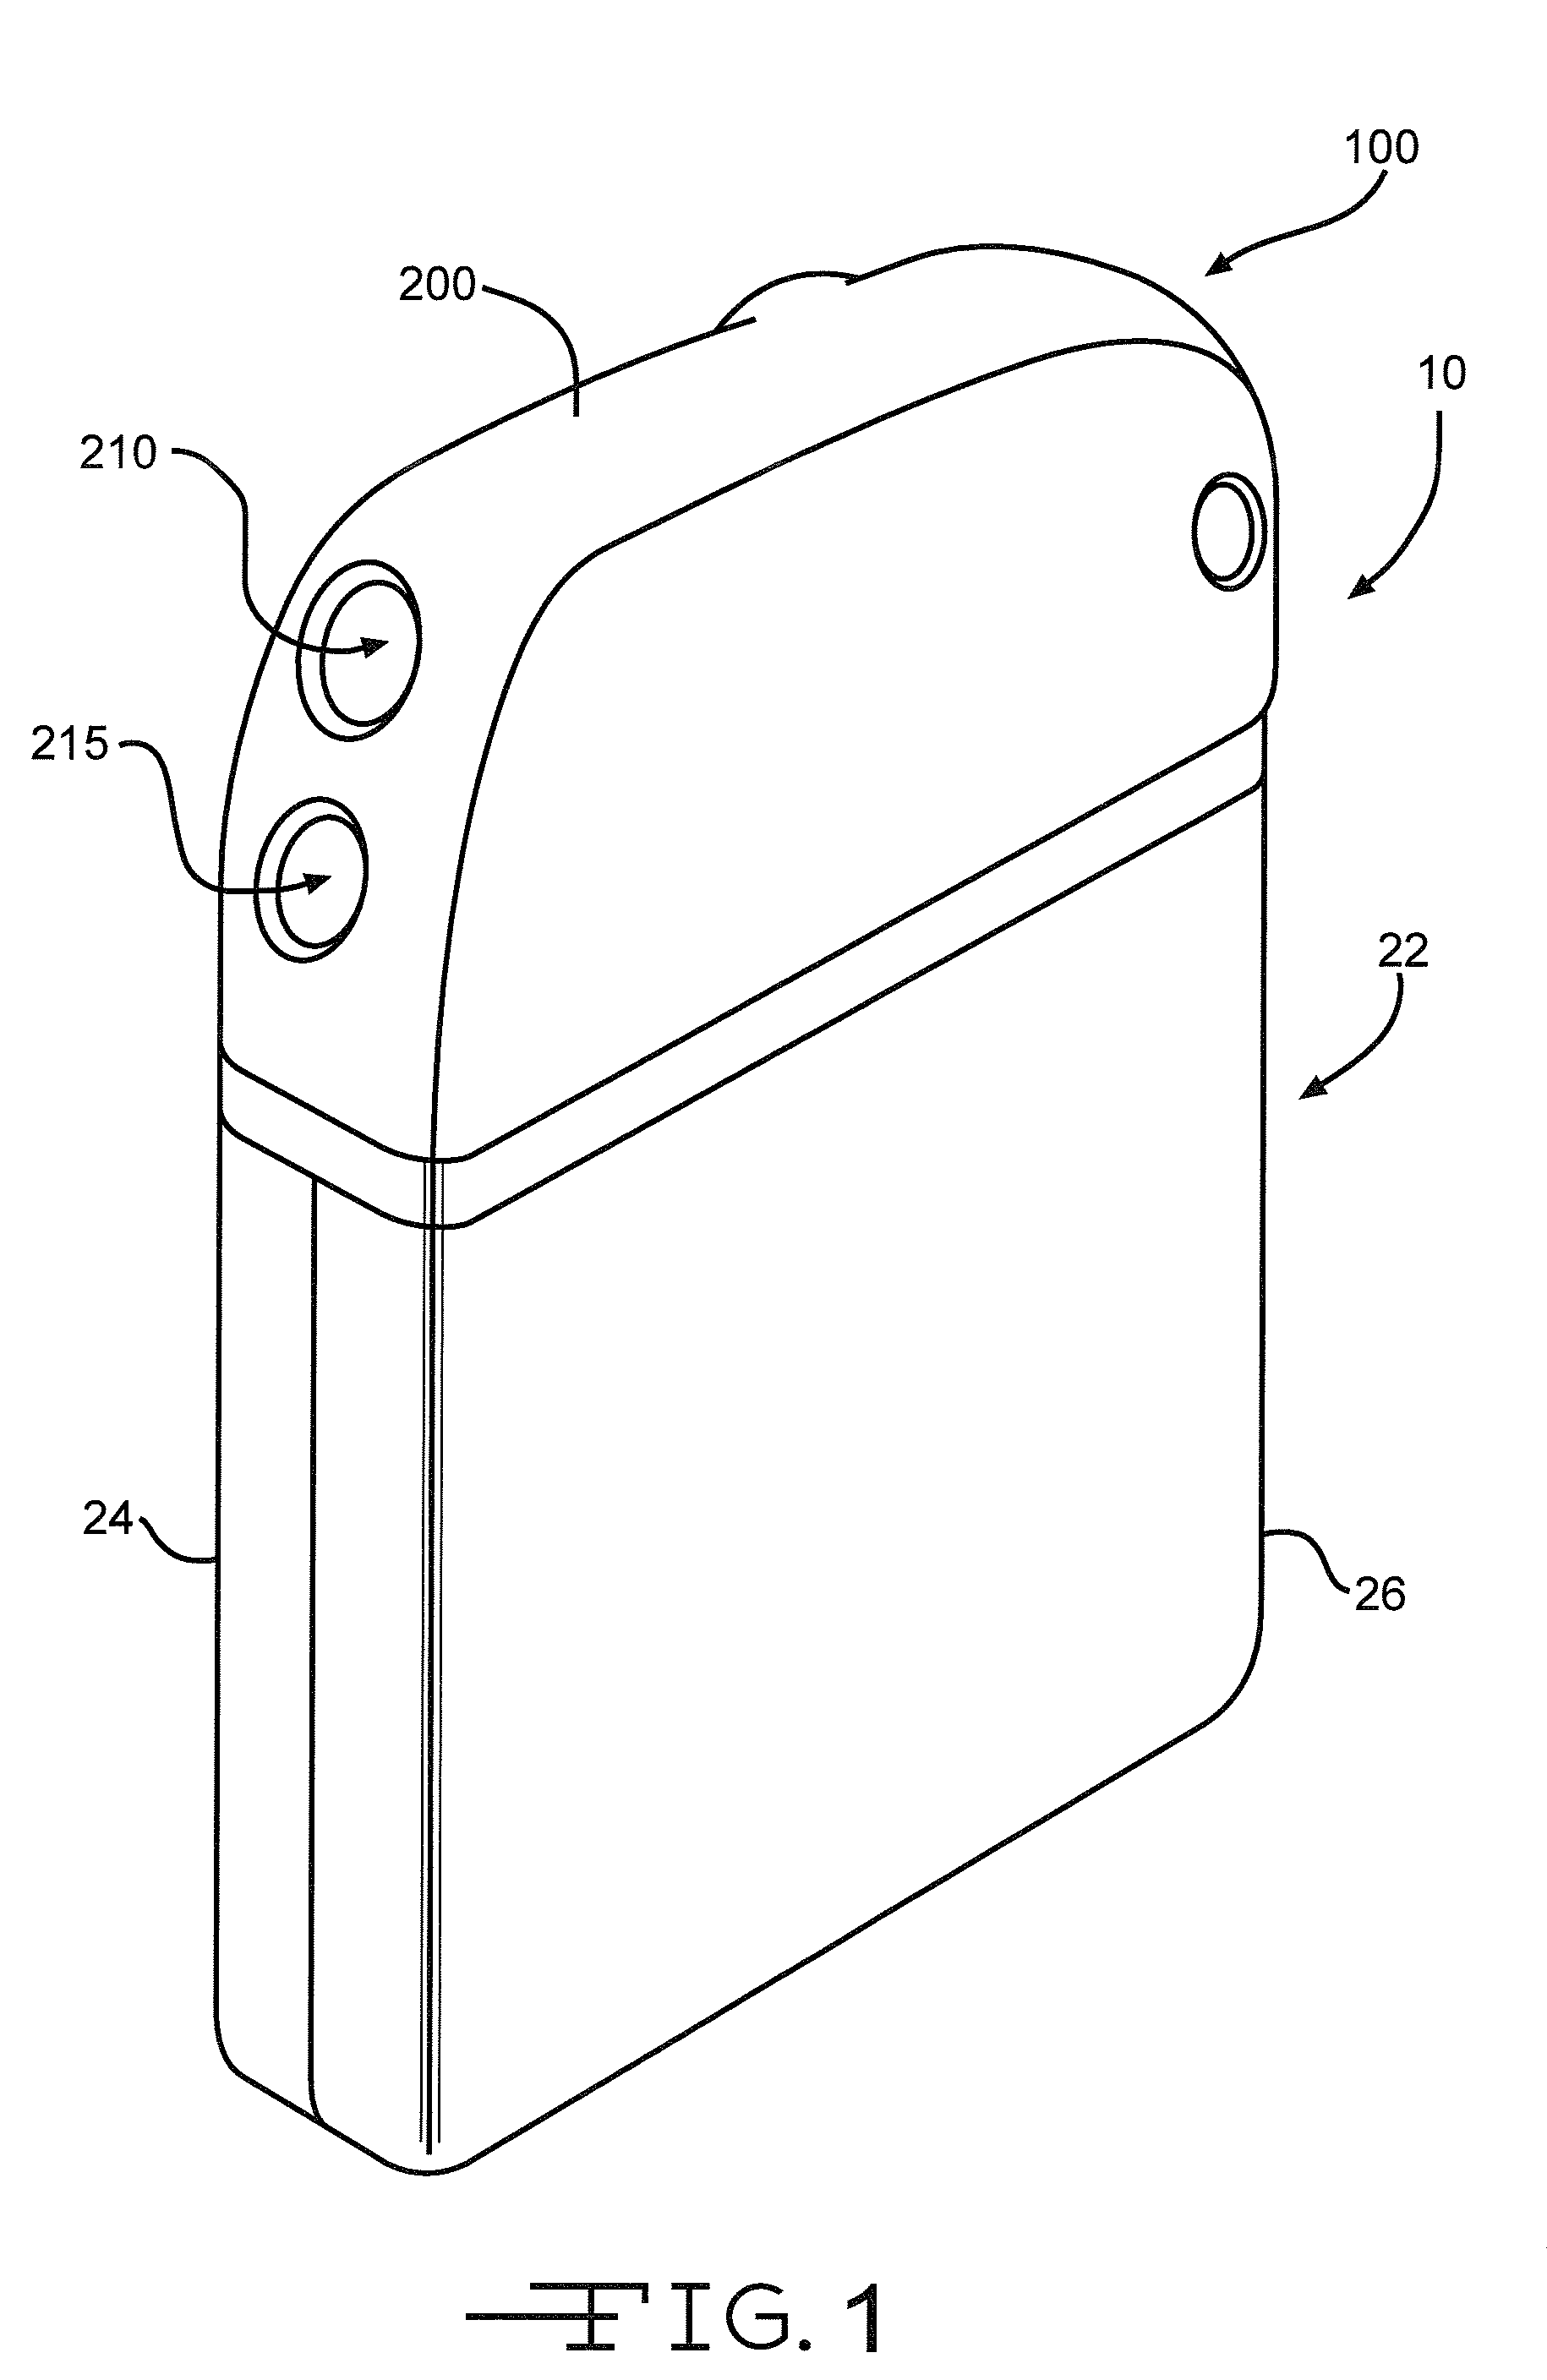 Header over-molded on a feedthrough assembly for an implantable device